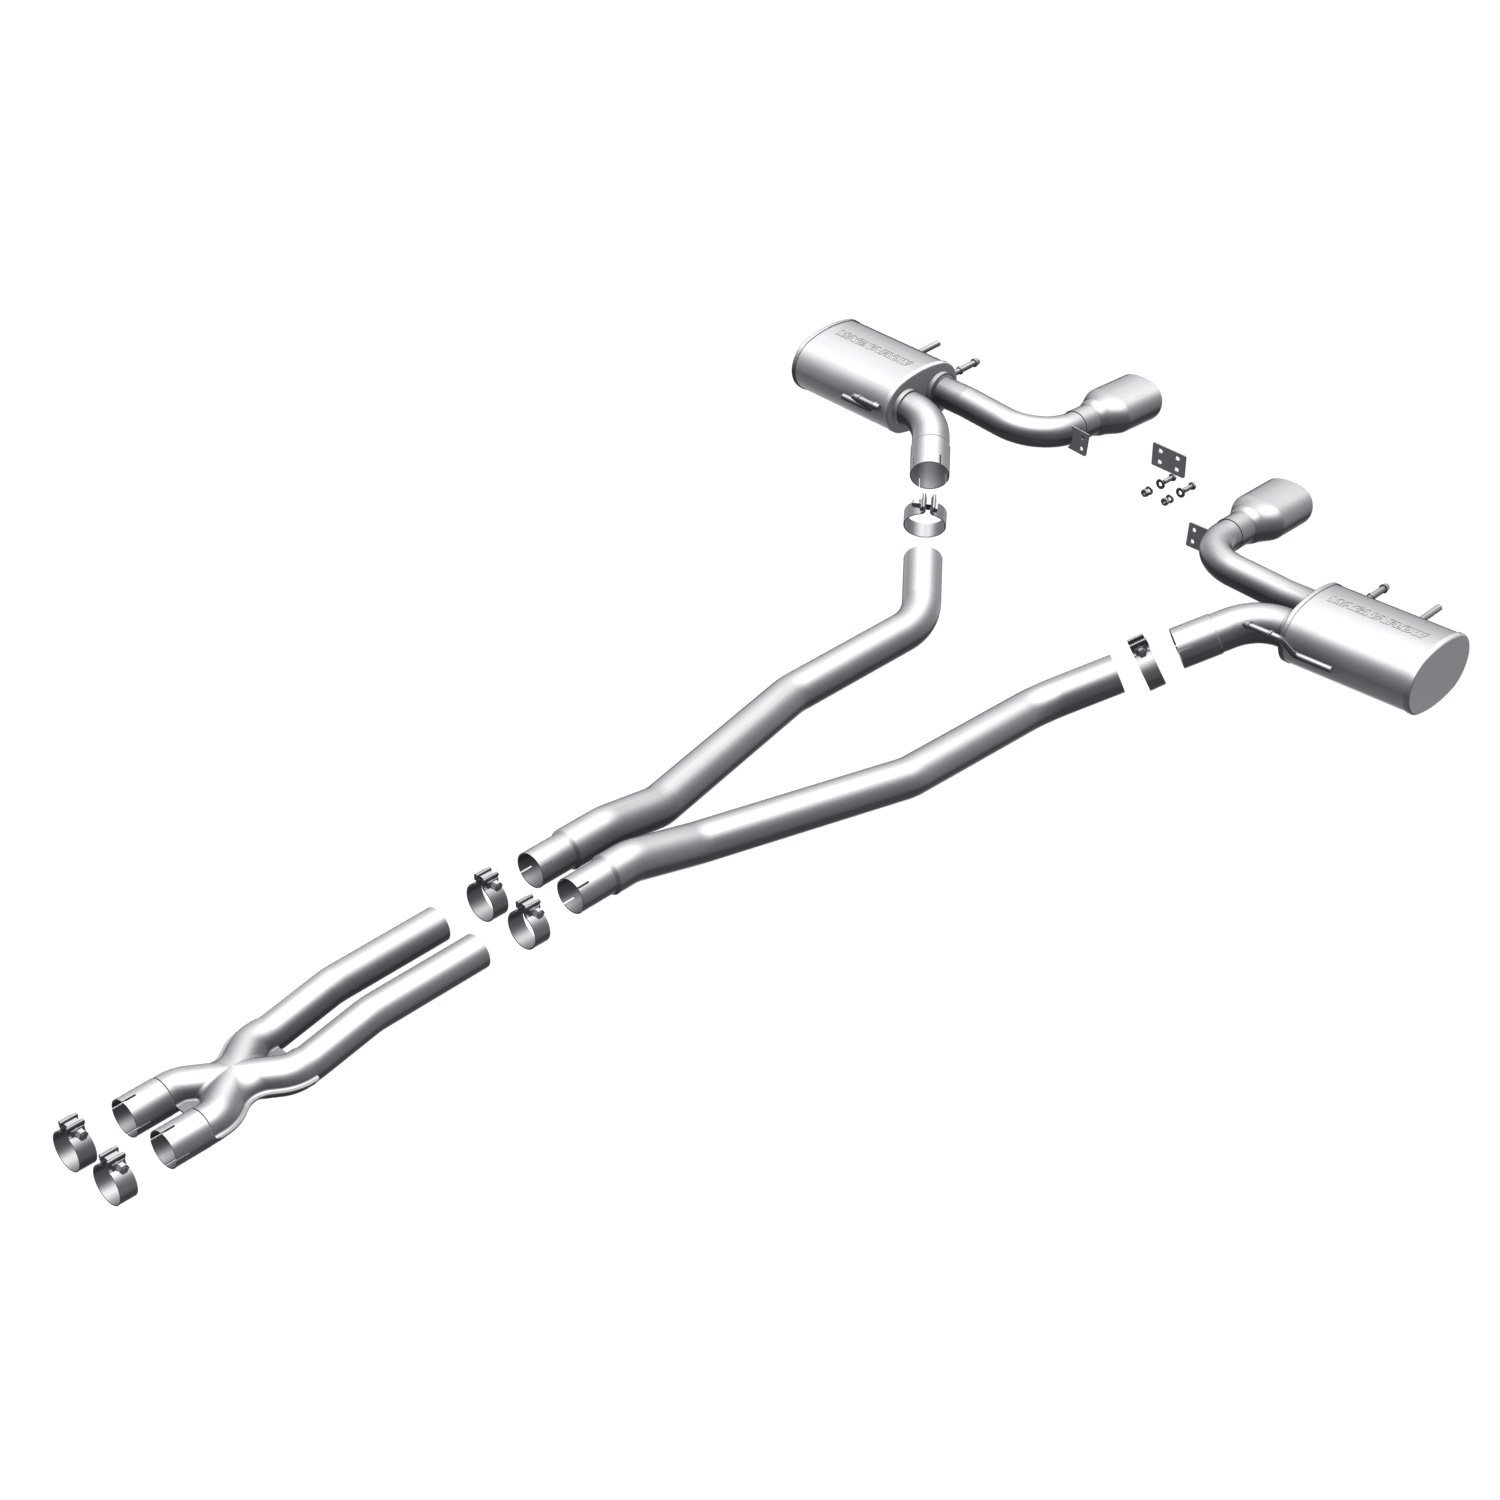 Polished Stainless Tip; 5 x 8 x 14 in Magnaflow Performance Exhaust 15496 Stainless Steel Cat-Back Performance Exhaust System; 2.5 in Tubing; 4 in Muffler; Dual Center Rear Exit; 